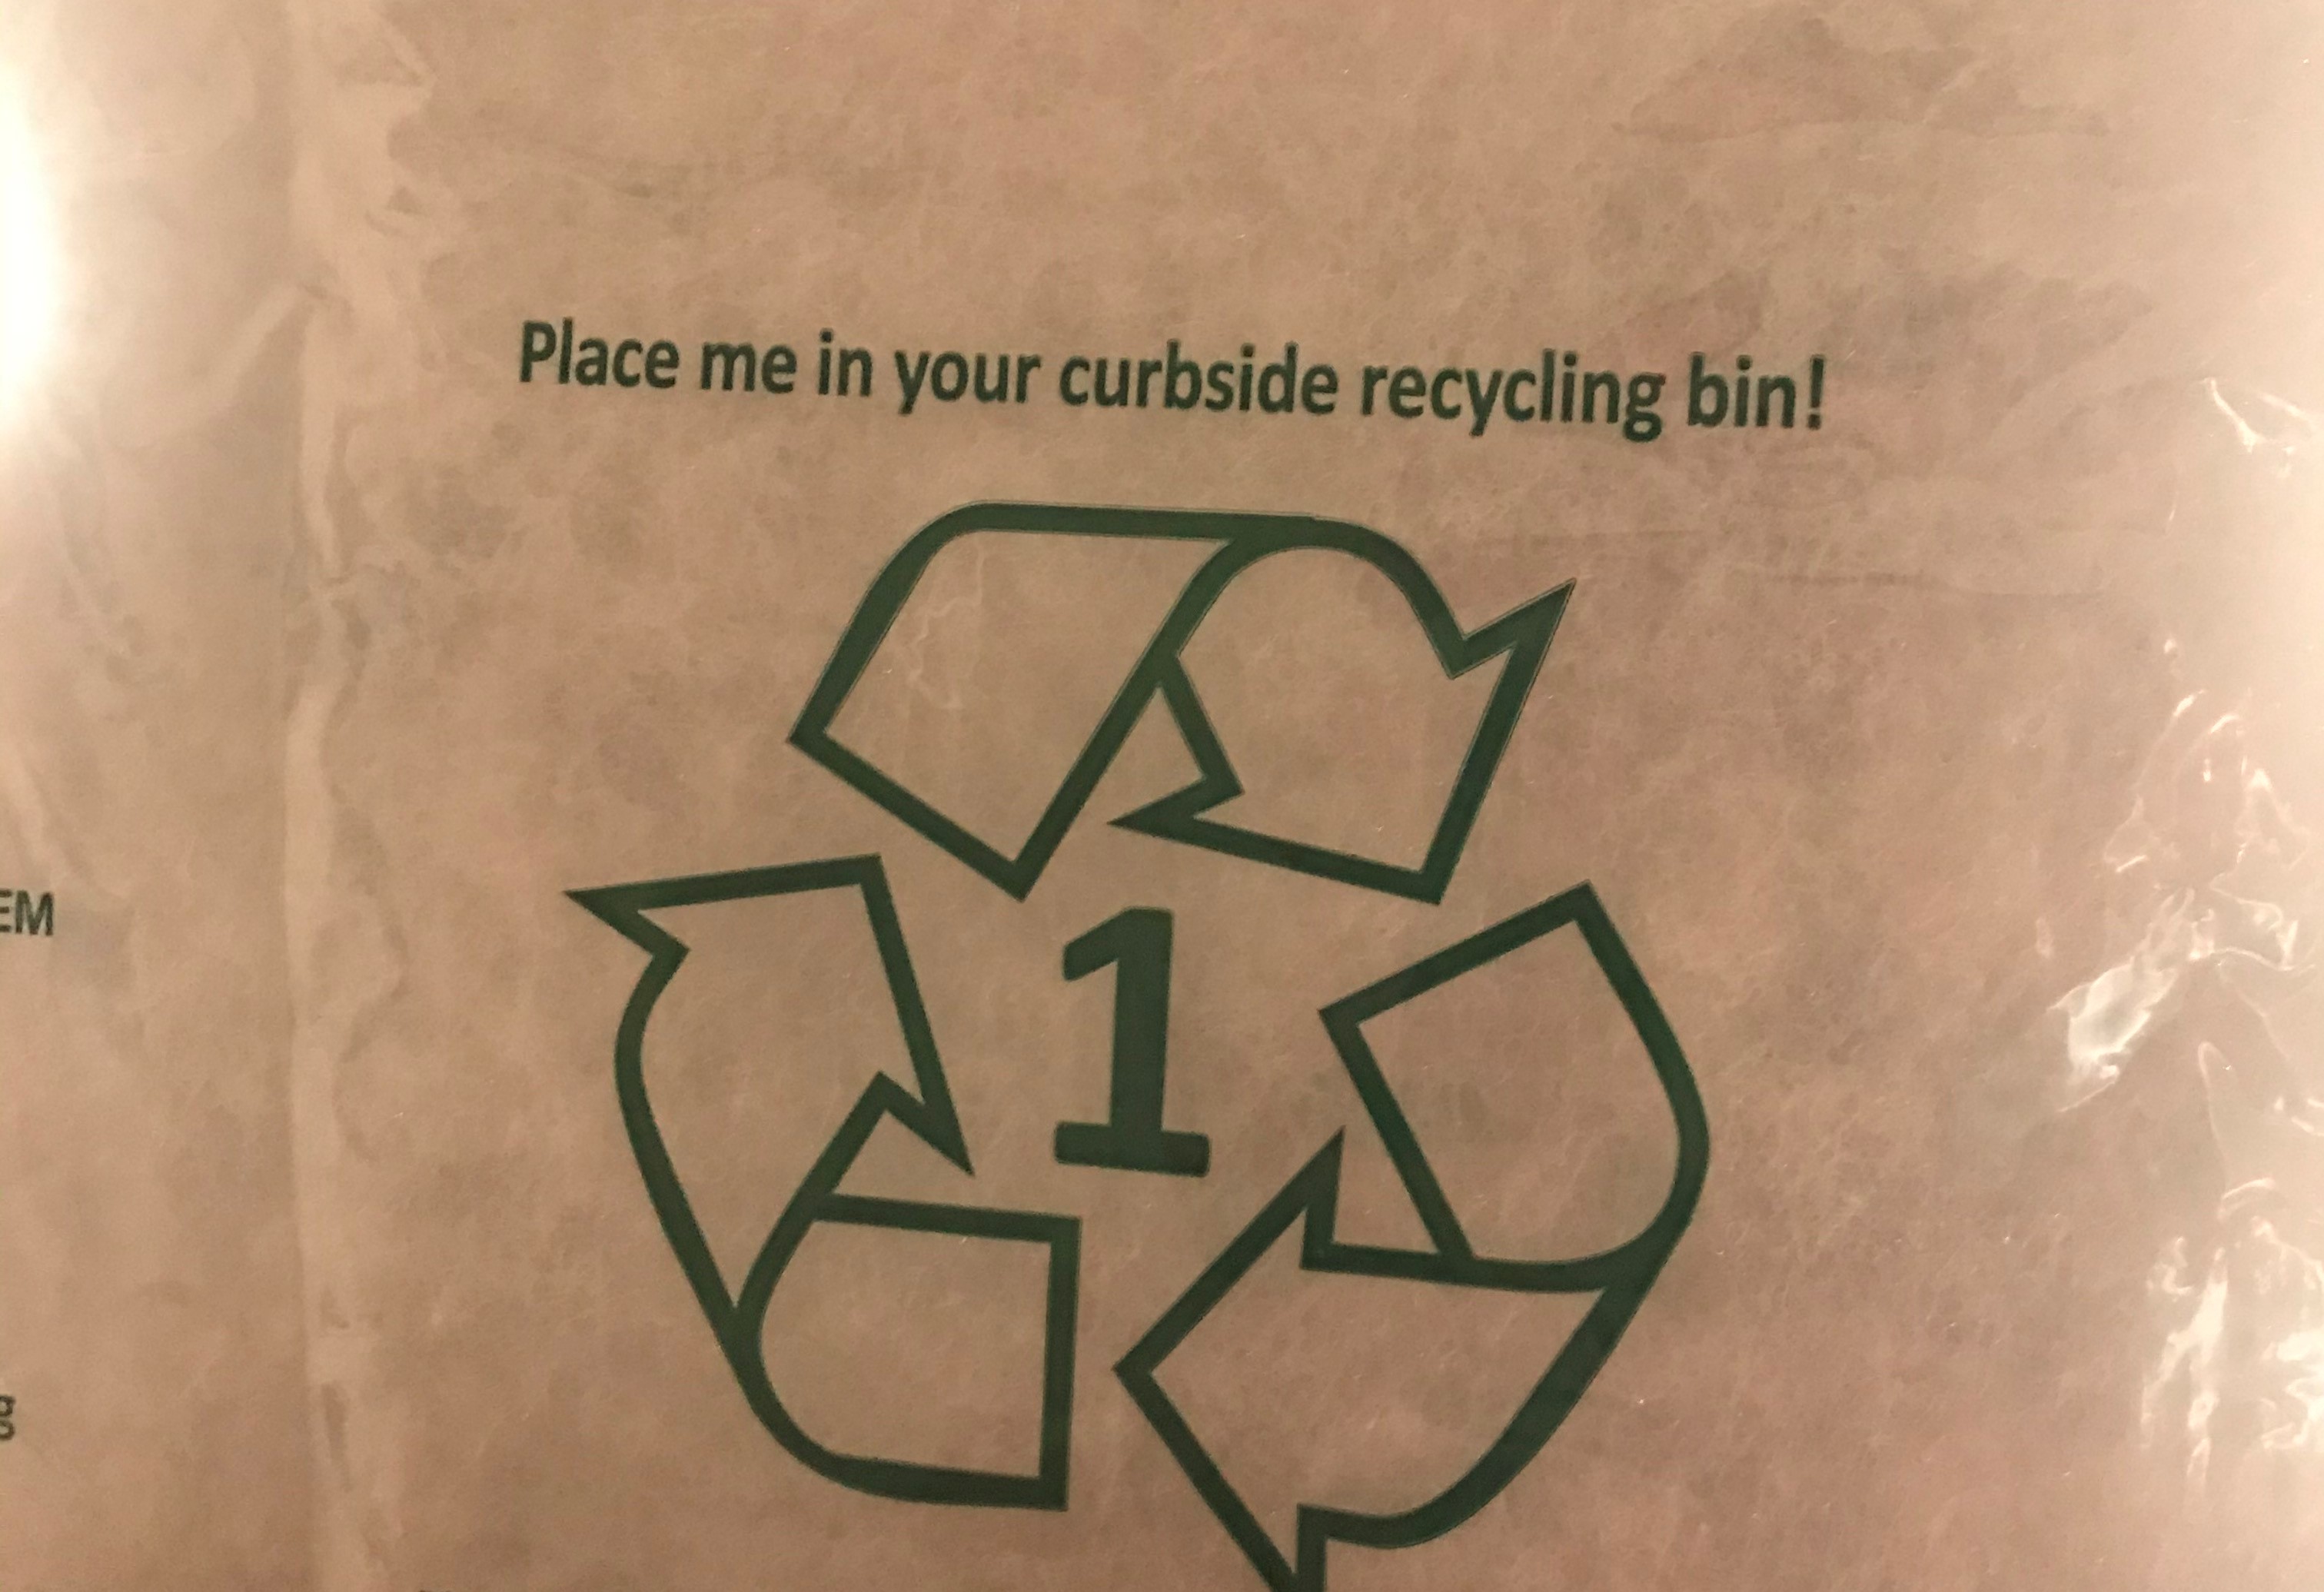 Unaccepted item labeled as recycling